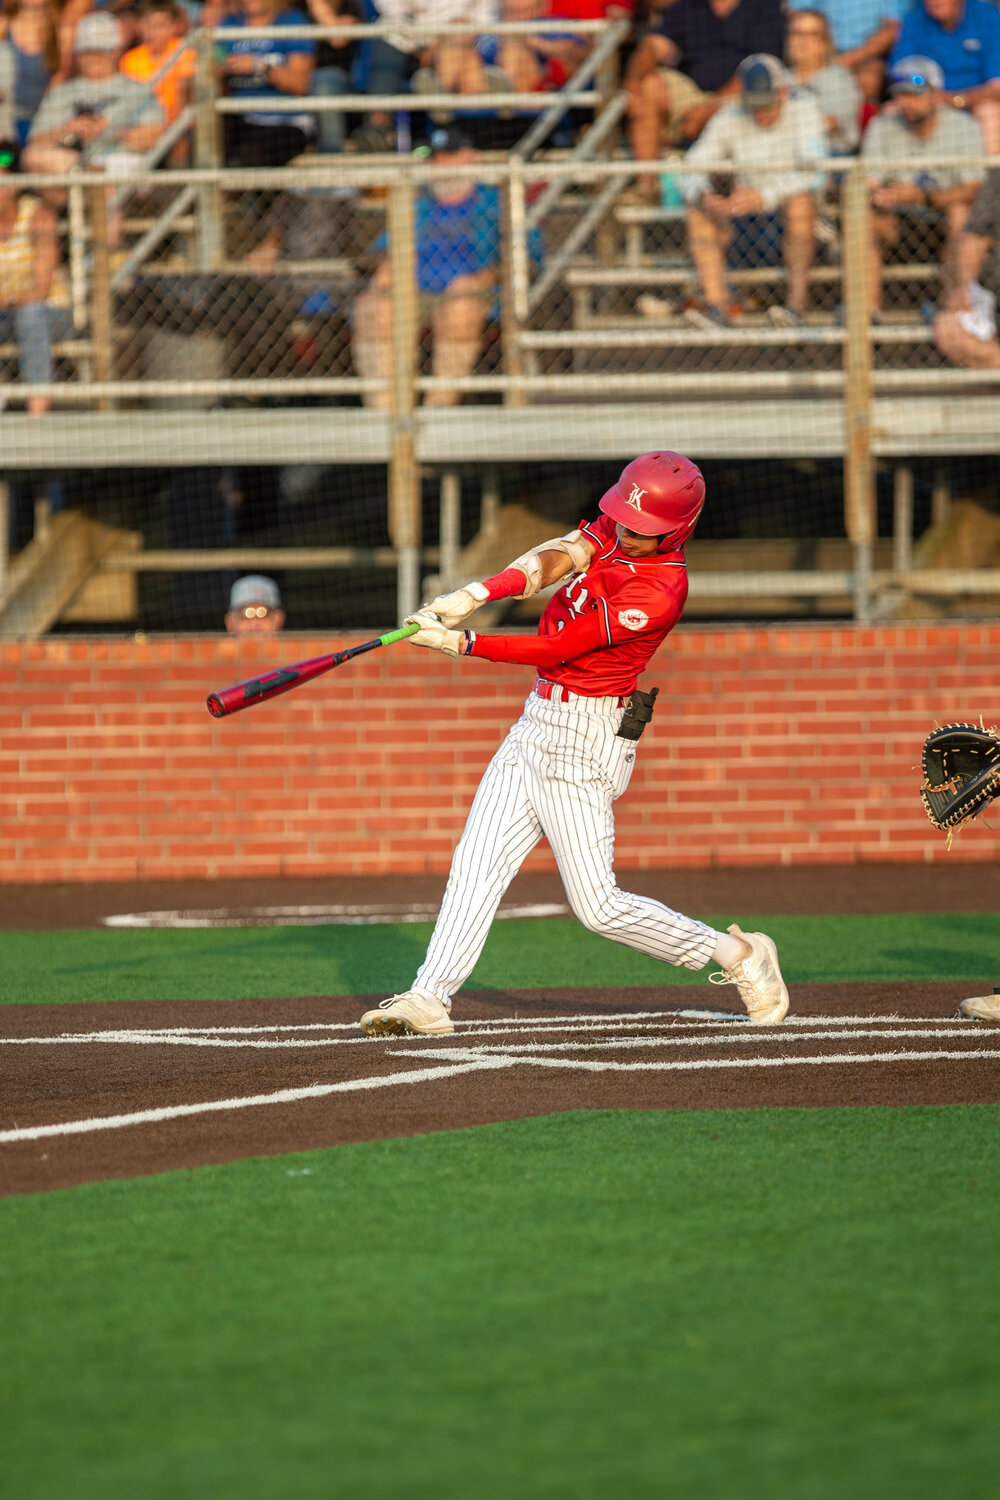 AJ Atkinson hits during Wednesday's Regional Semifinal between Katy and Clear Springs at Deer Park.